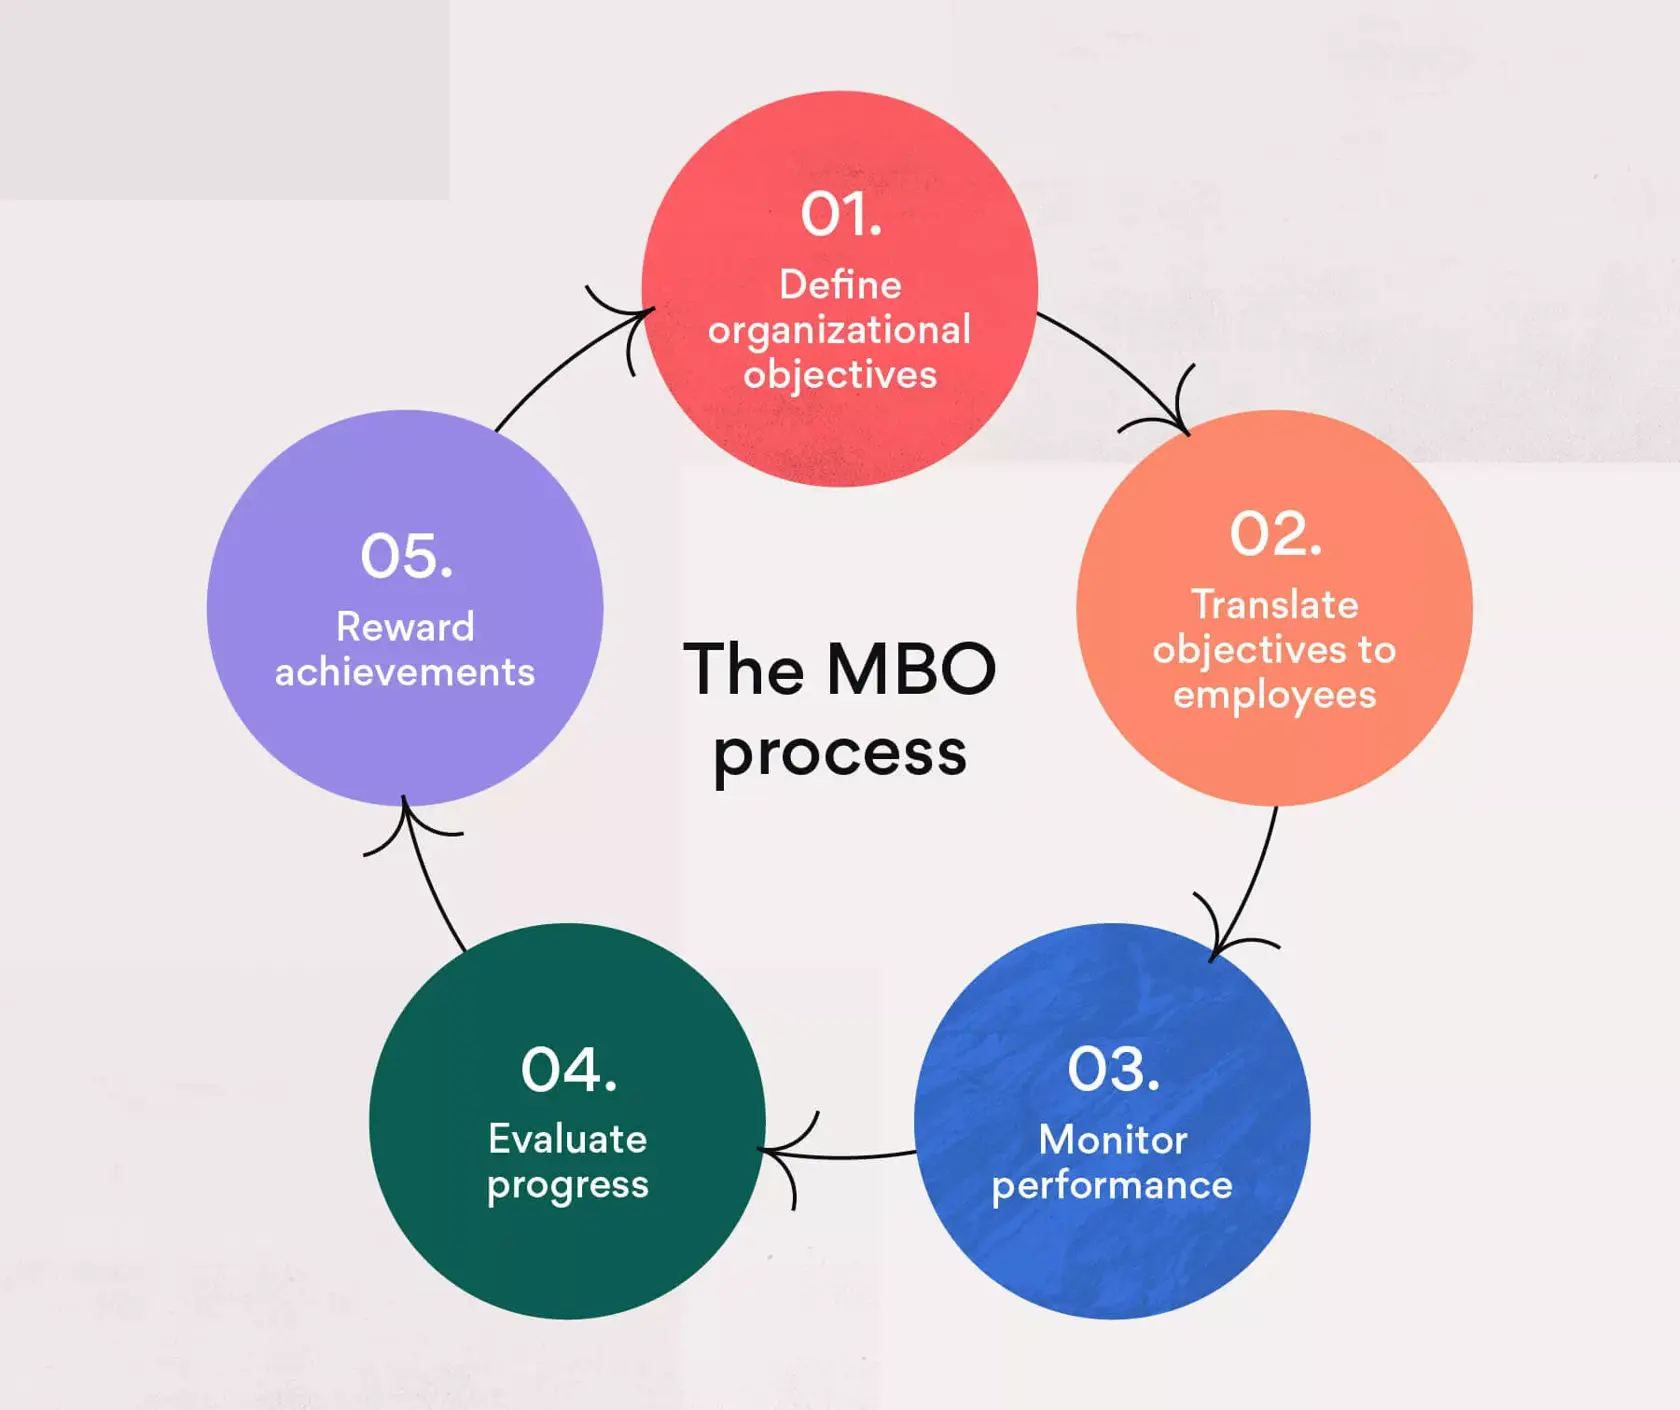 The 5 step MBO process